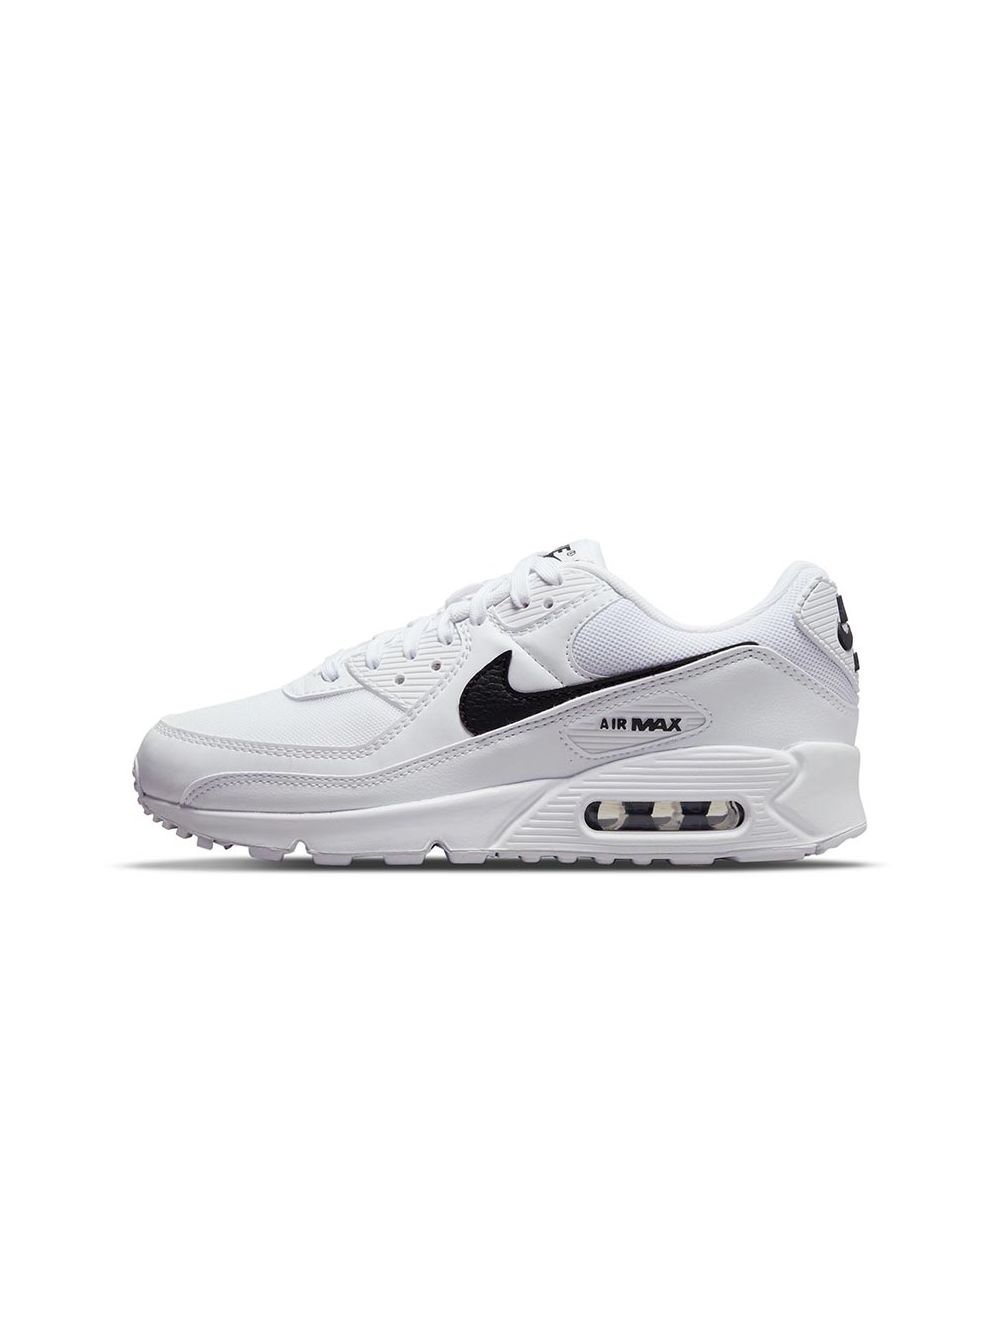 Air Max 270 Womens | Sneakers | Stirling Sports